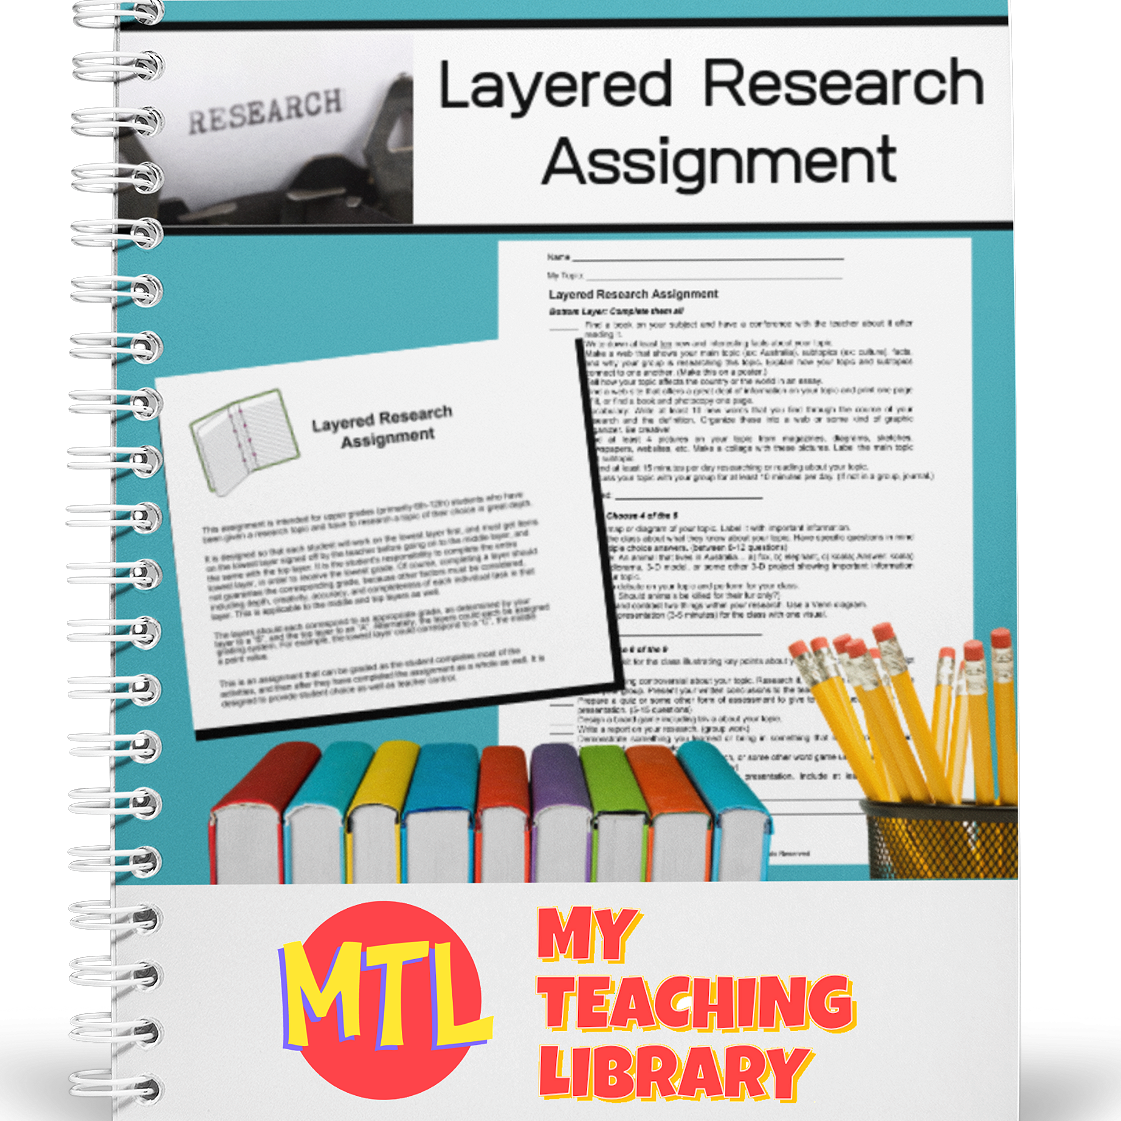 z 475 Layered Research Assignment cover